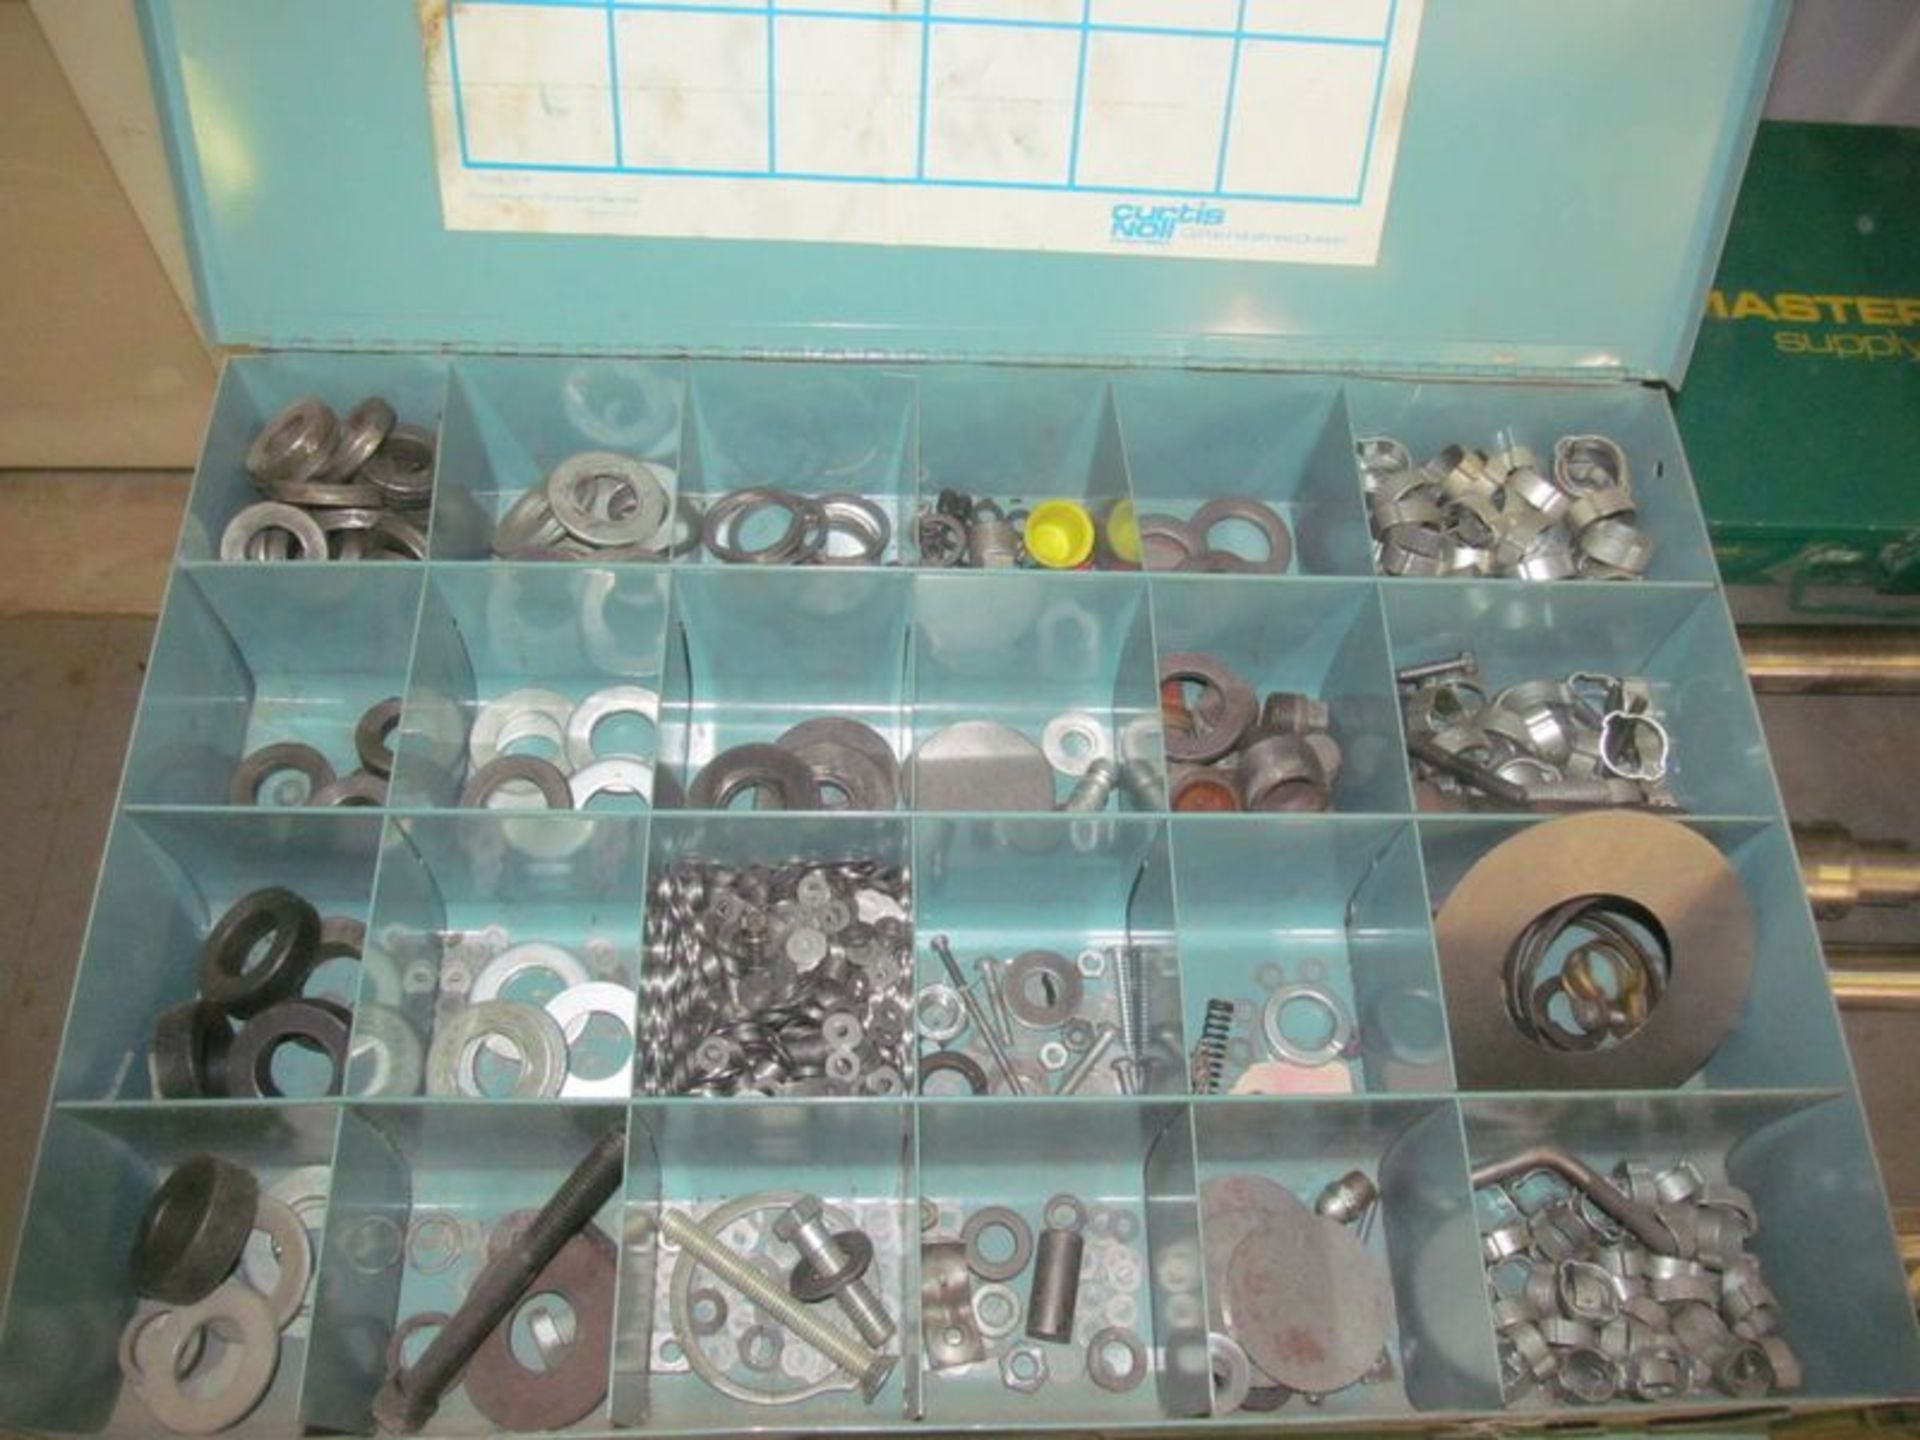 Lot ass't parts cabinets with contents, includes bearings, hardware, hold downs, etc. - Image 7 of 14